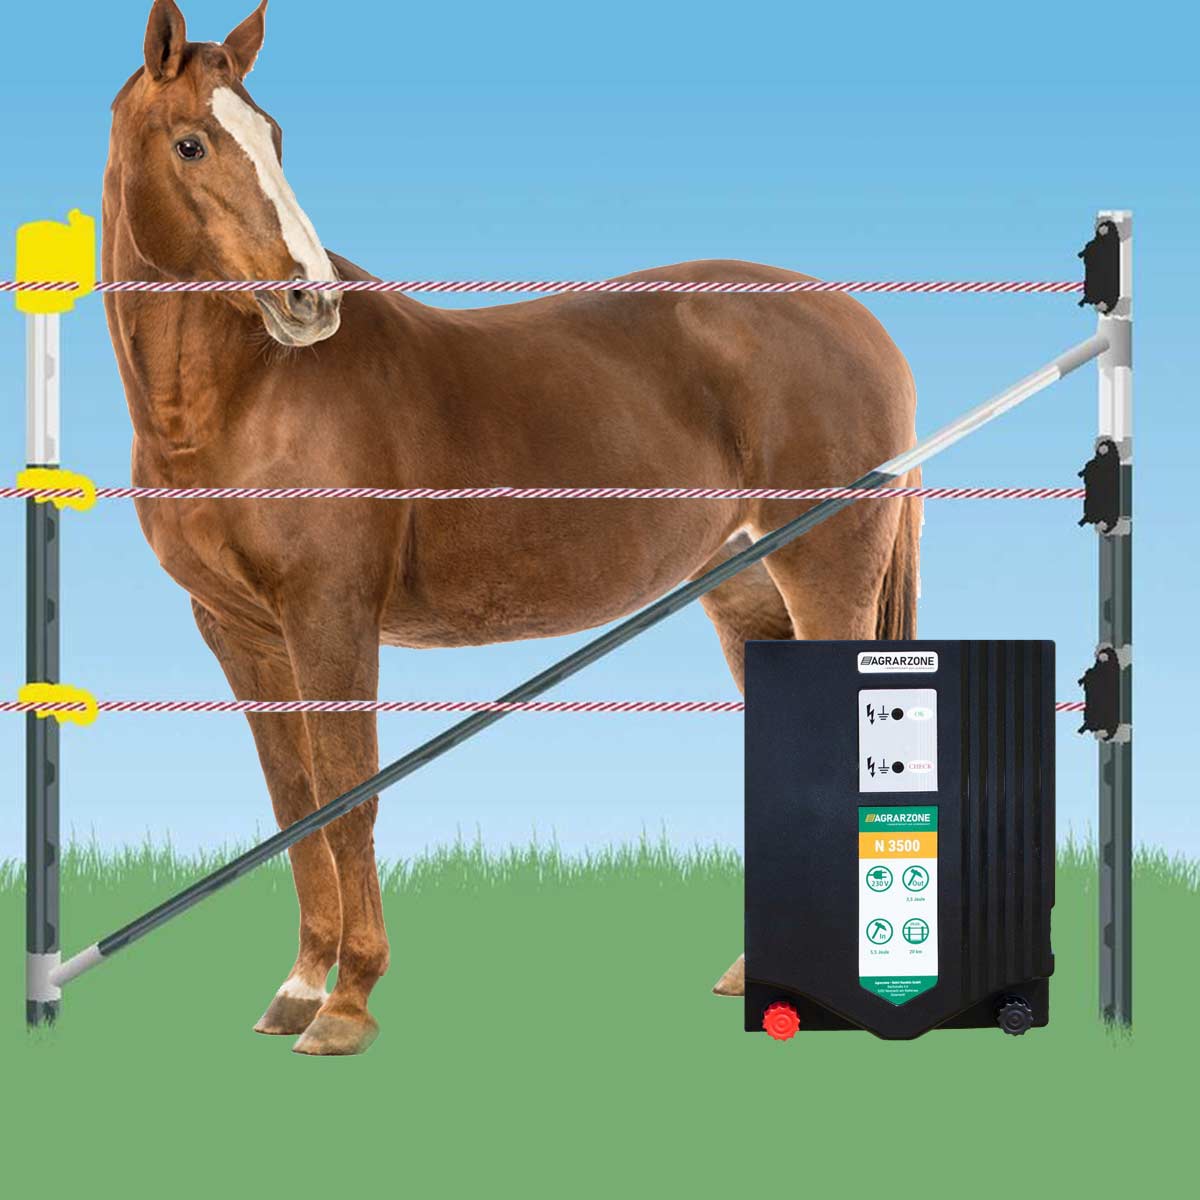 Horse fence set n3500 230v, 300m T-post fixed fence 182 cm, 3 rows, 1 gate